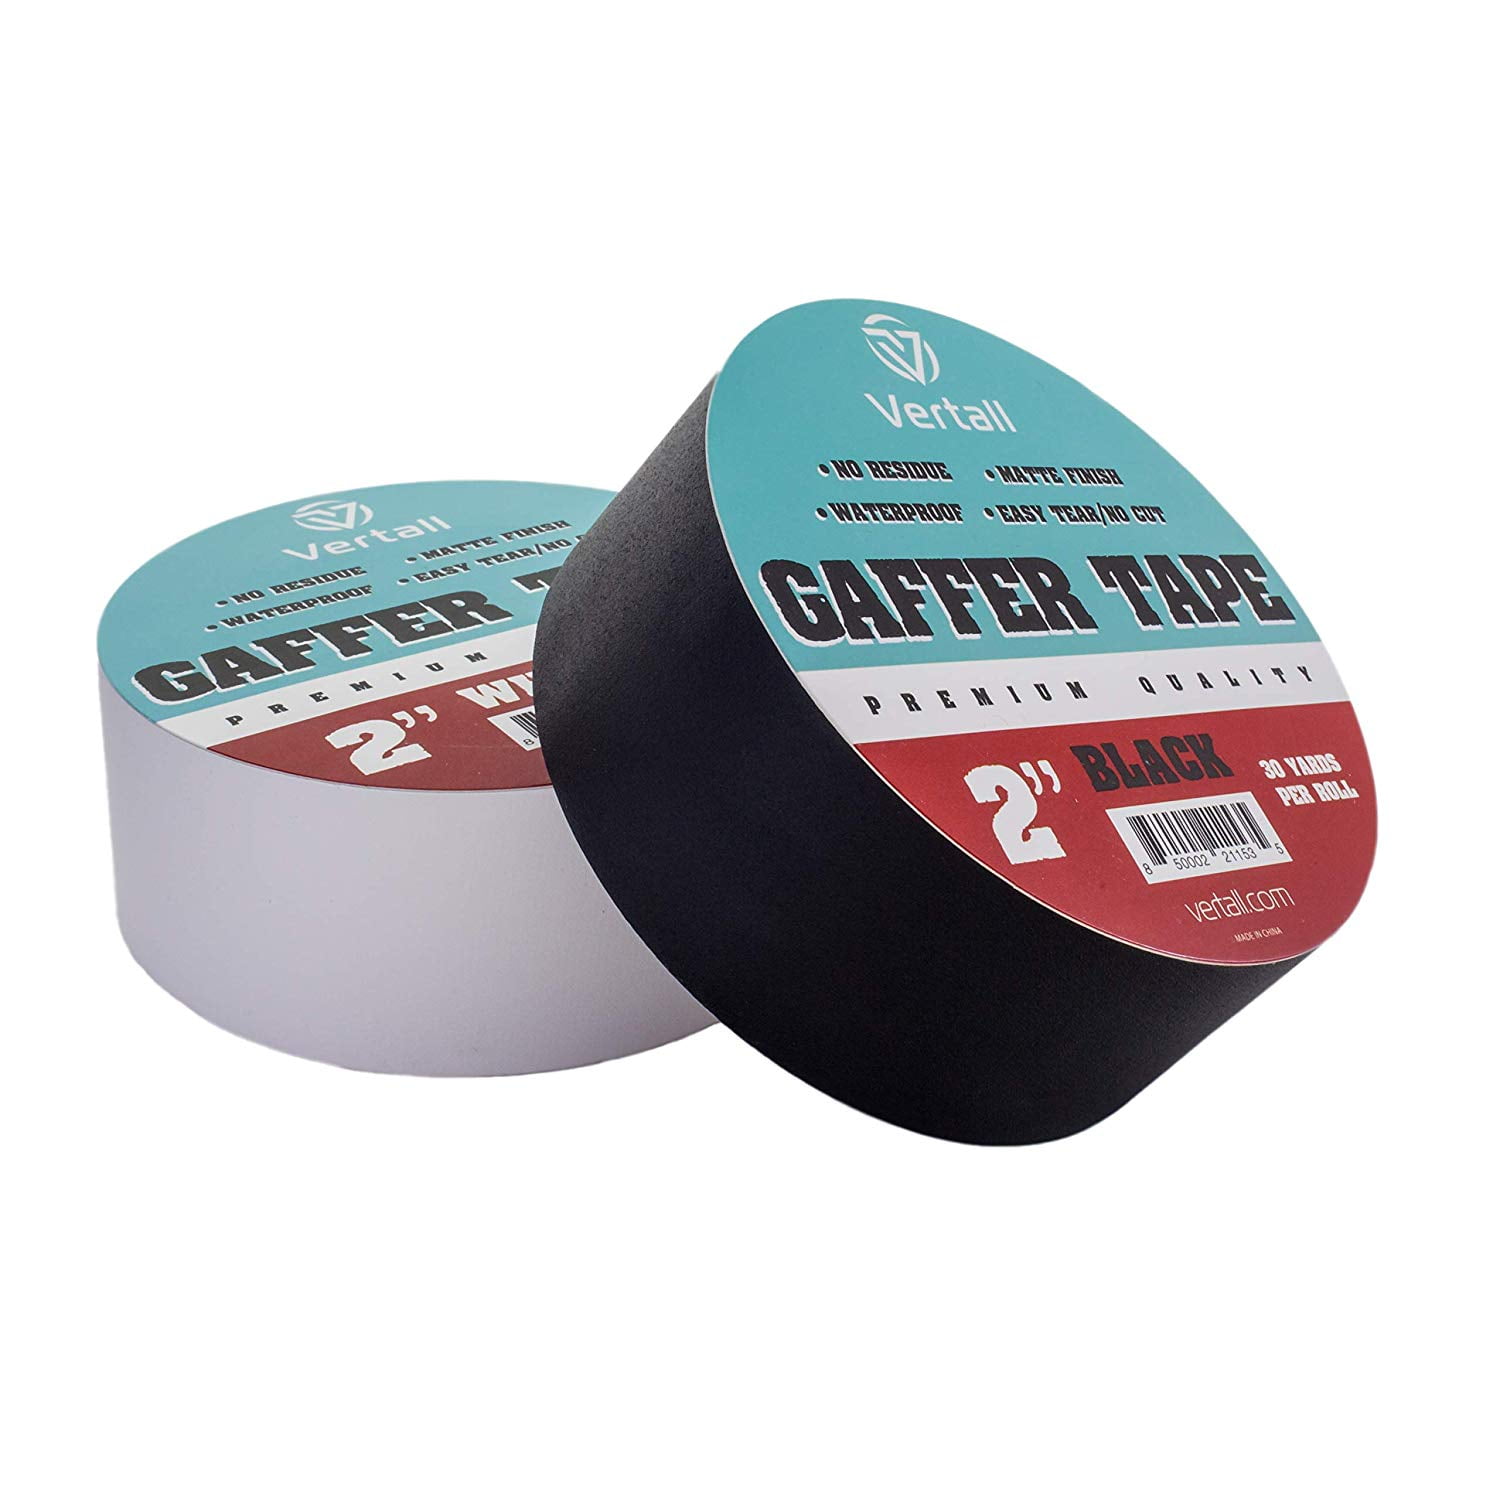 Residue Free Non Reflective x 60 Yards MAT Gaffer Tape Black Low Gloss Finish Film Available in Multiple Colors 2 in Better Than Duct Tape 